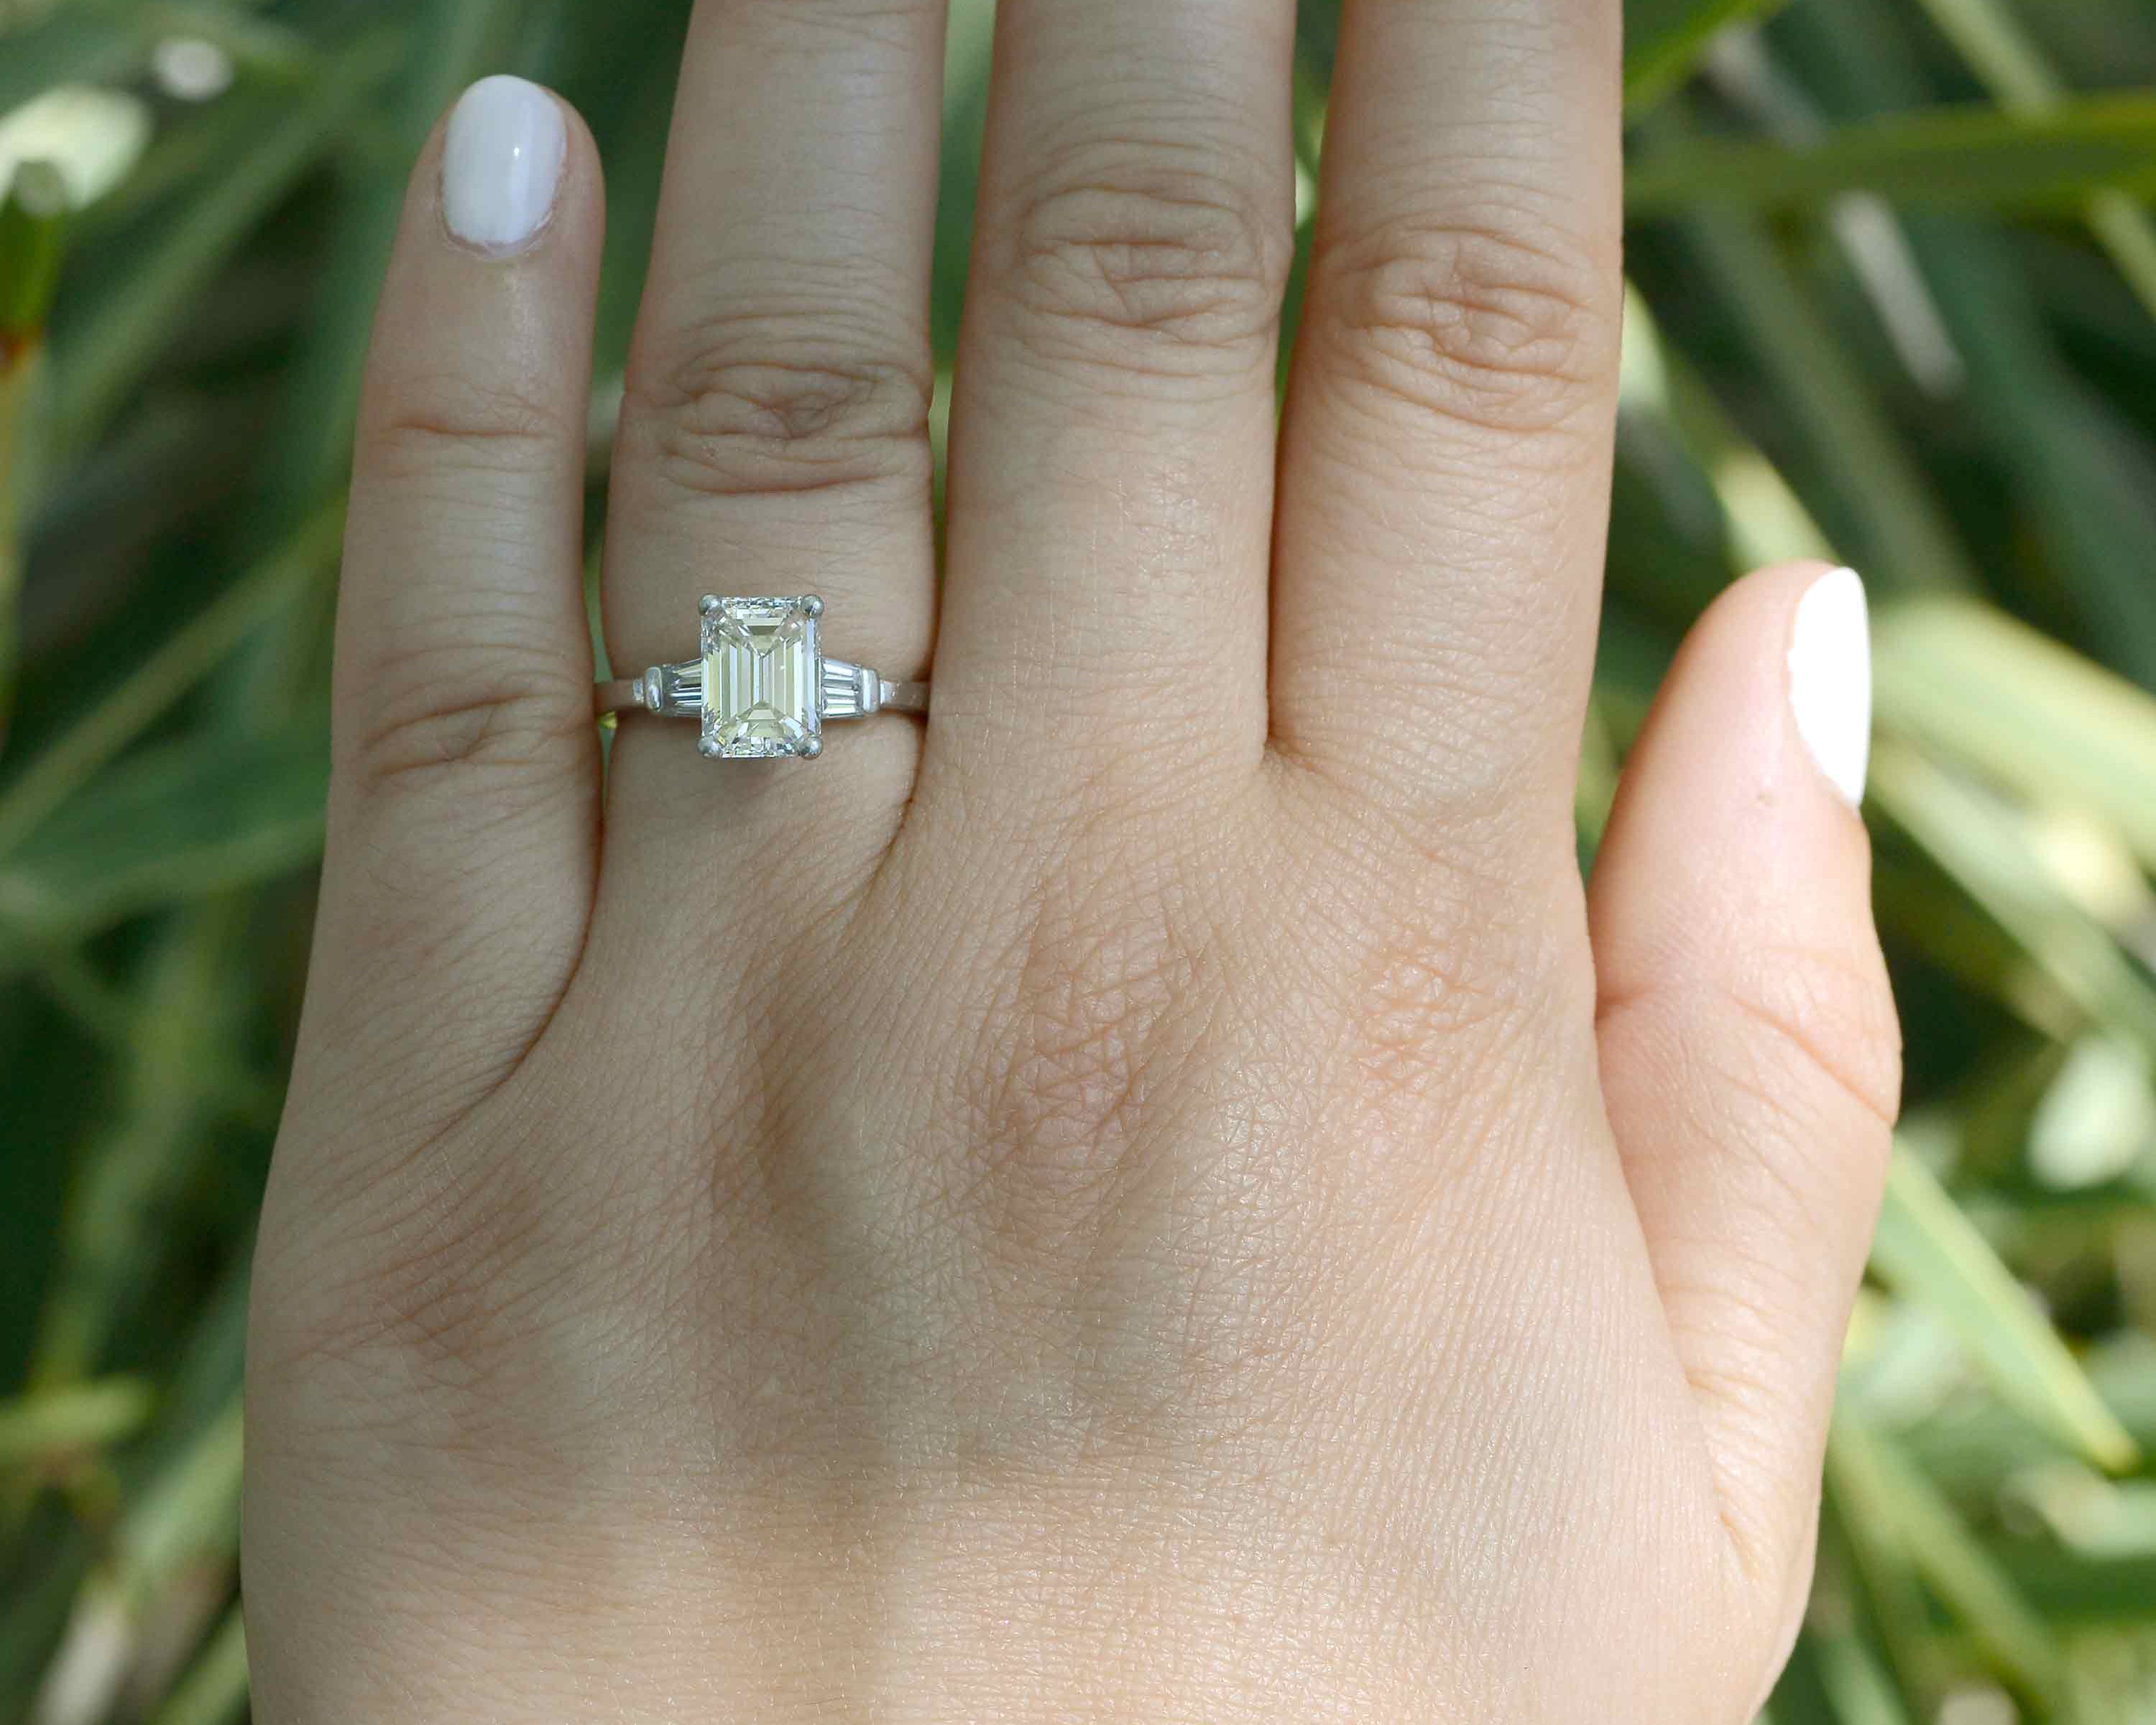 The center two carat emerald-cut diamond has an exquisite brilliance and liveliness.